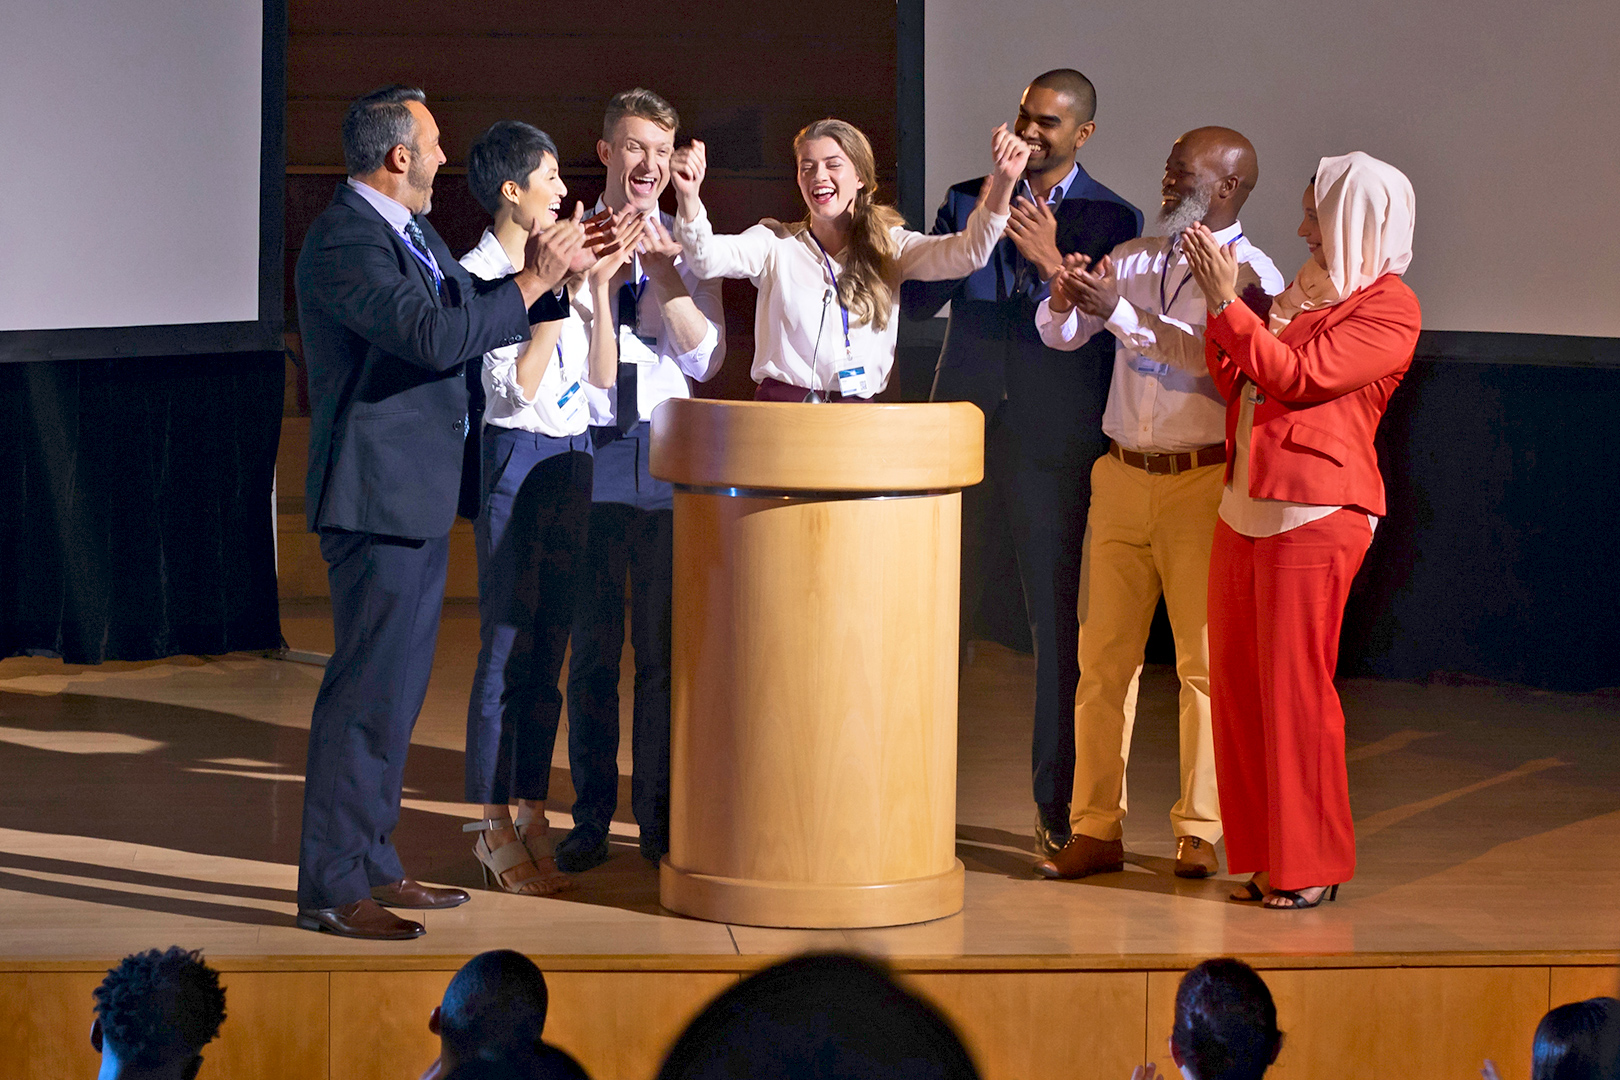 Group of people gathered on a podium at an event